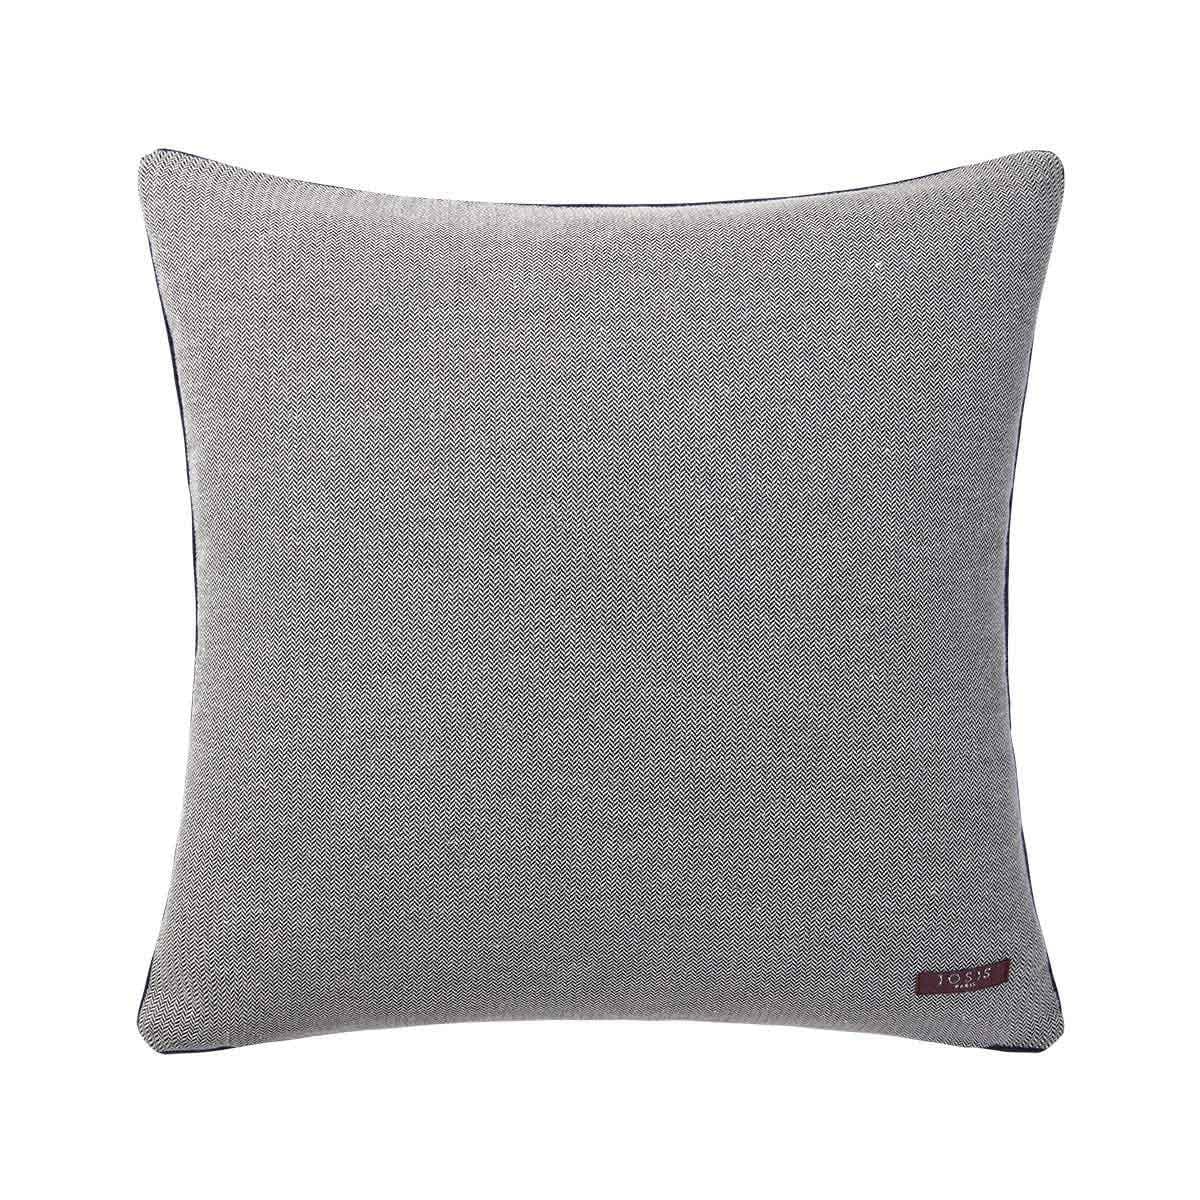 Decorative Pillows Iosis Cigales Decorative Pillow by Yves Delorme Yves Delorme